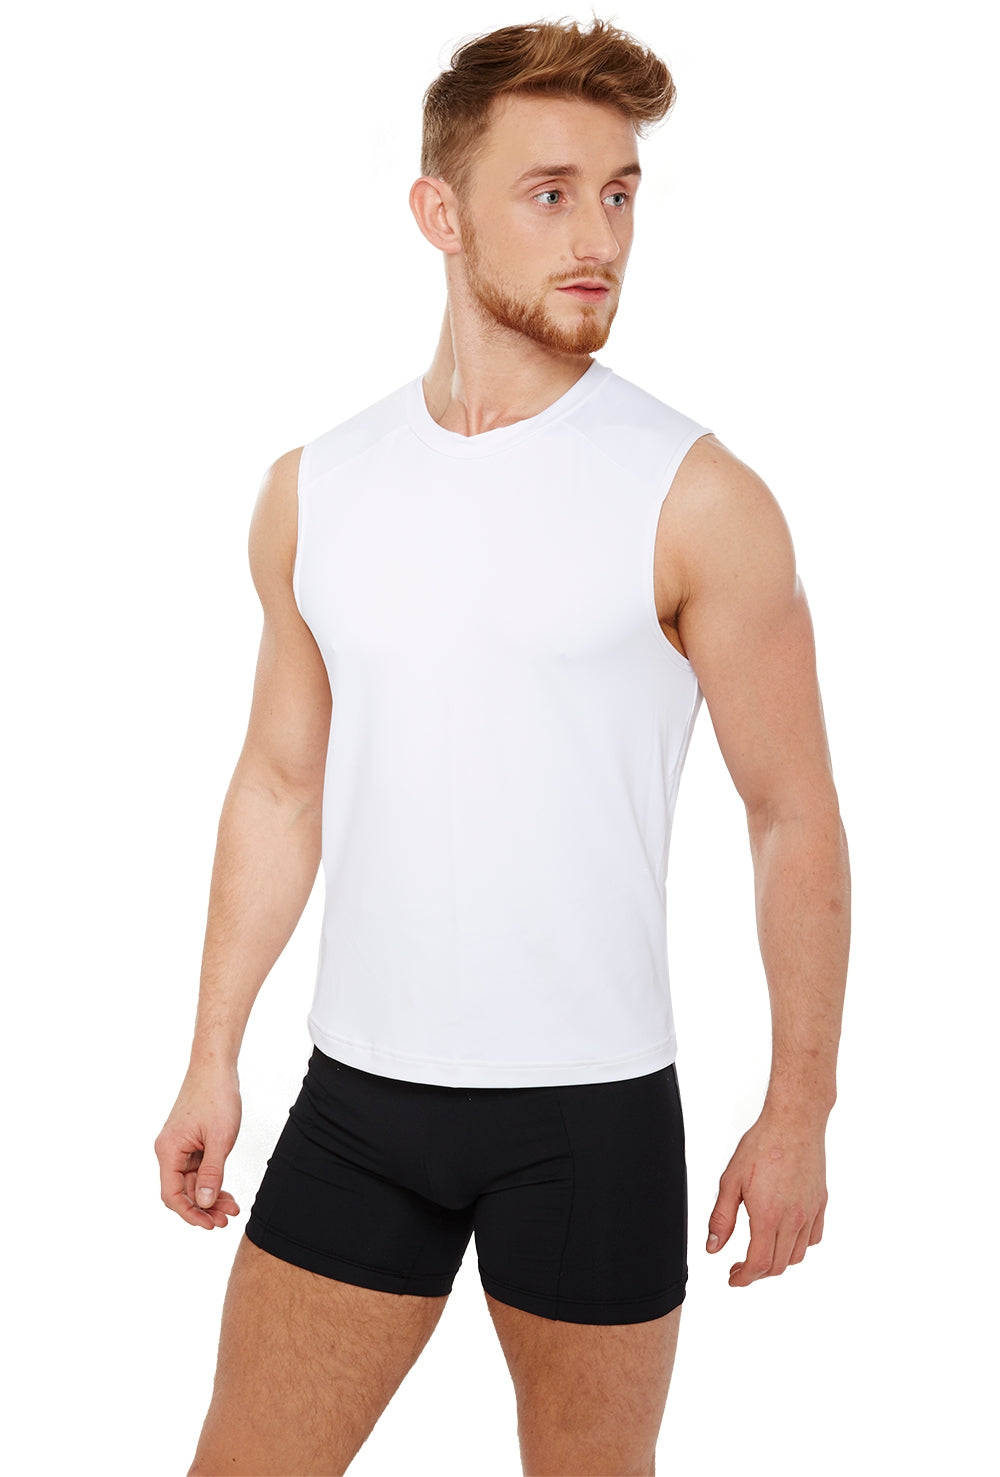 Capezio Mens Fitted Muscle Tee #10359